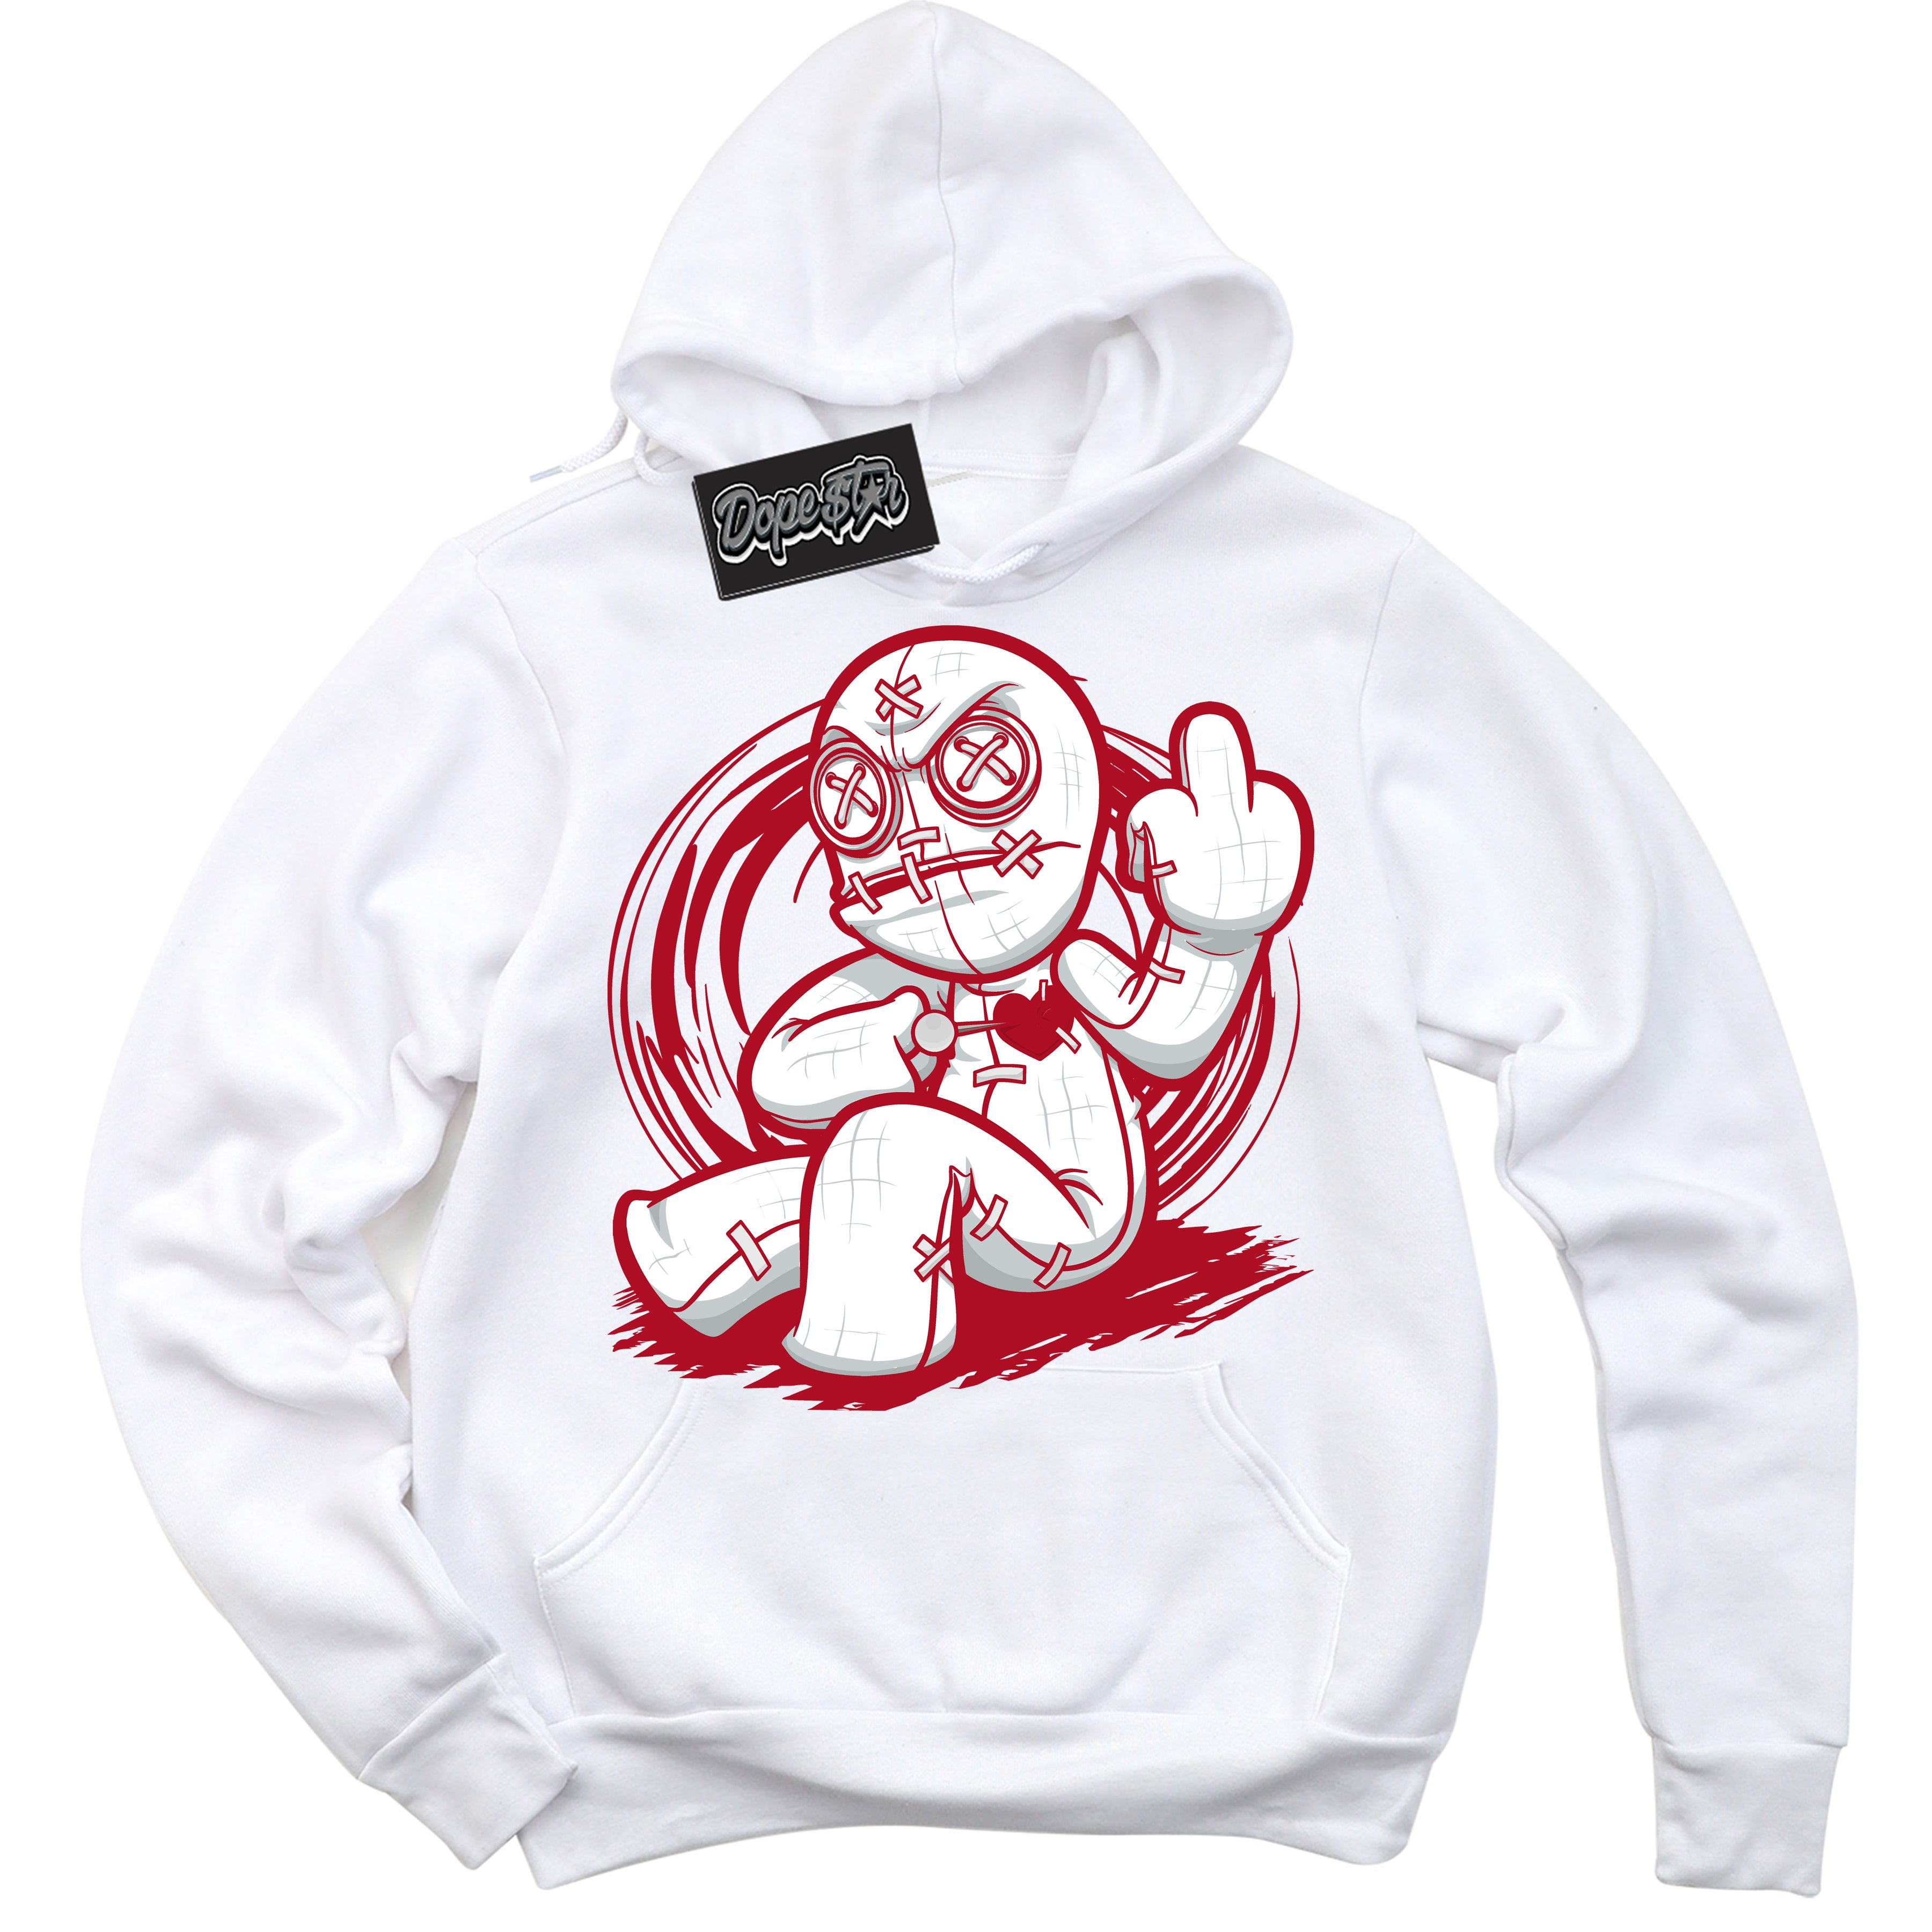 Cool Black Hoodie with “ VooDoo Doll ”  design that Perfectly Matches  Reverse Ultraman Sneakers.